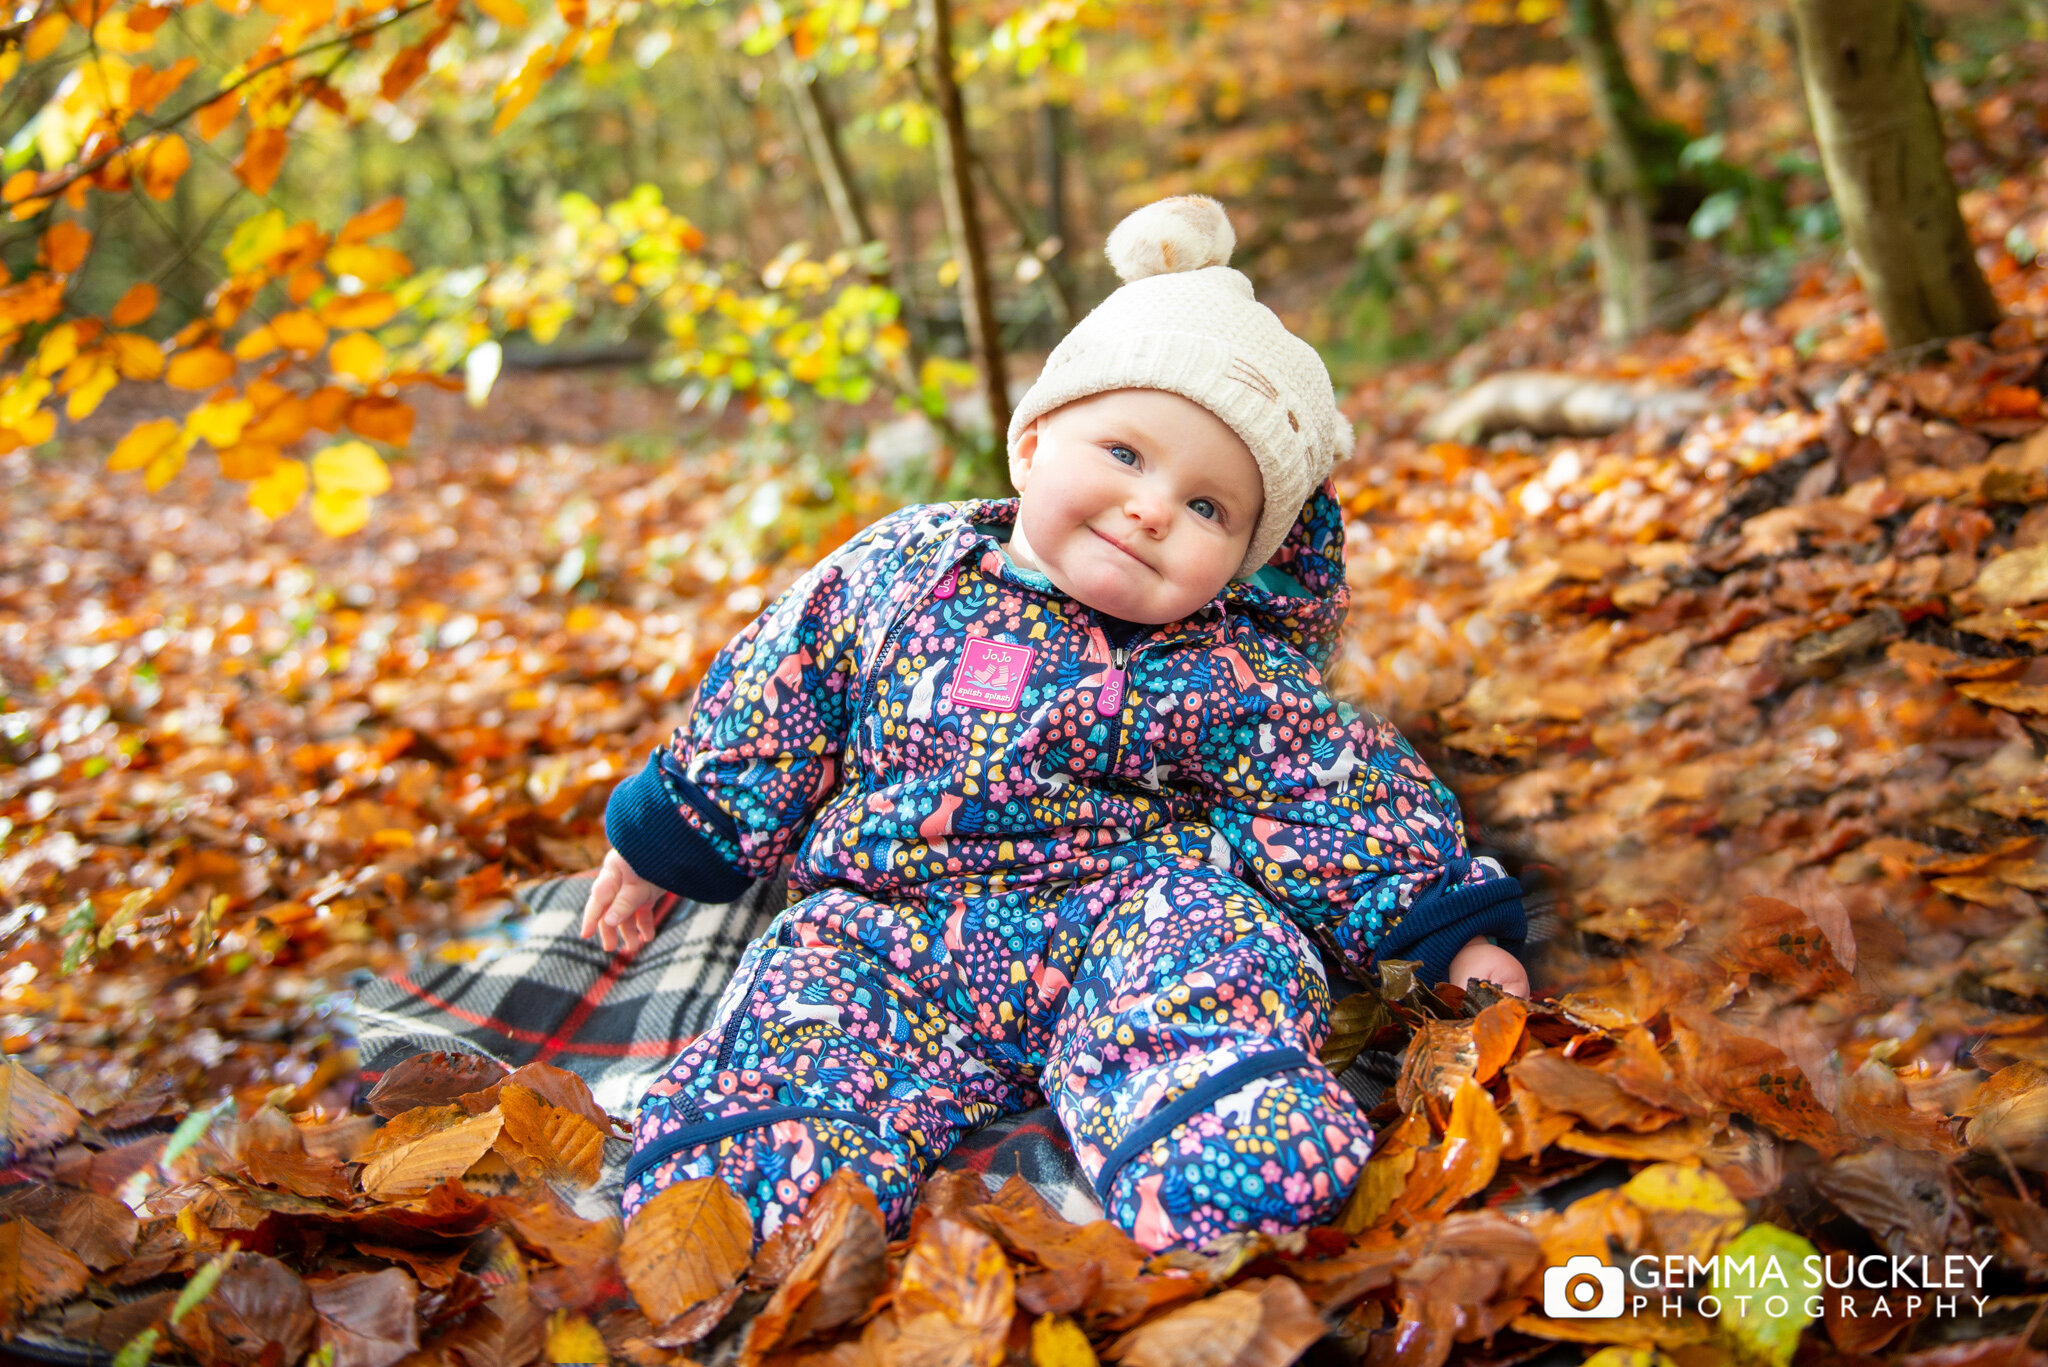 a smiling baby sitting in autumn leaves in skipton woods